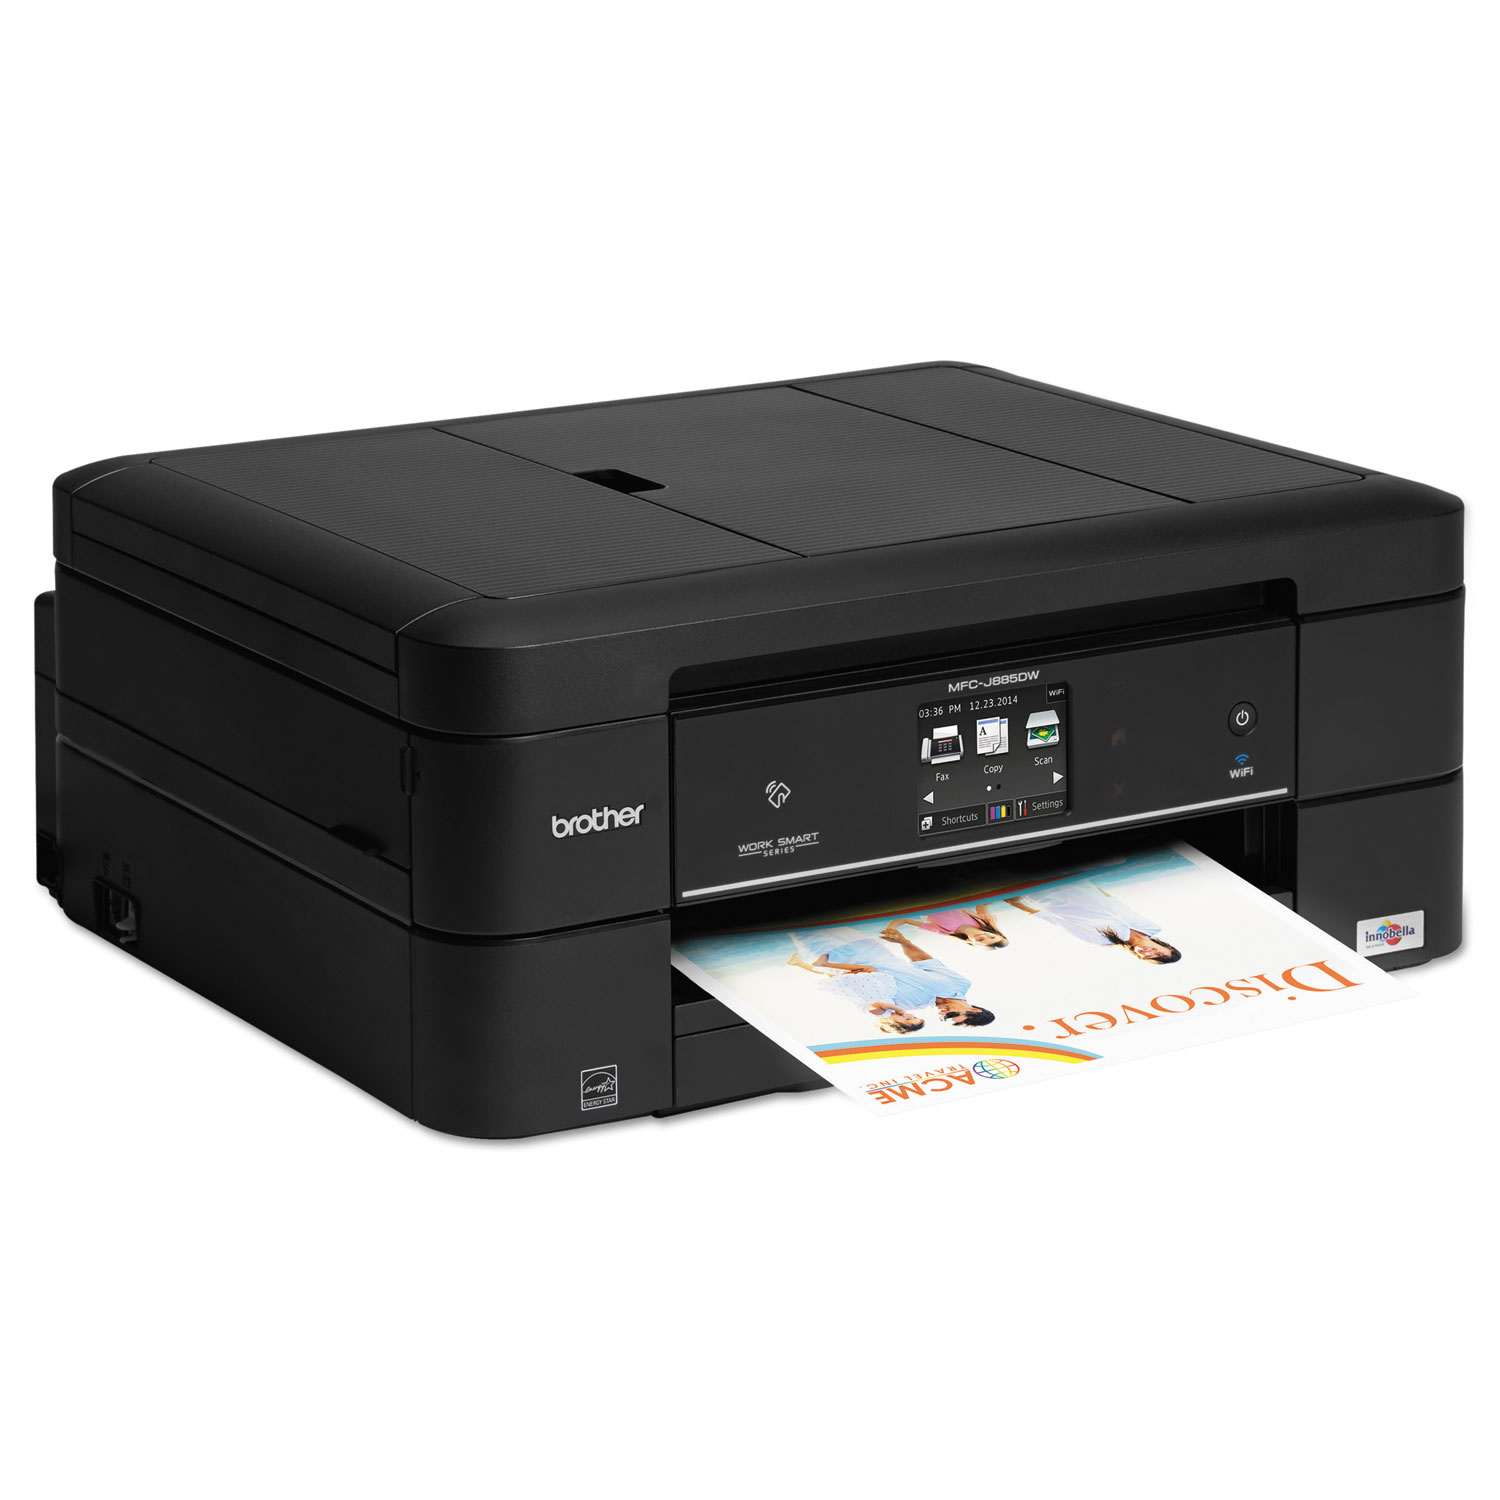 Work Smart MFC-J885DW Color Wireless Inkjet All-in-One, Copy/Fax/Print/Scan